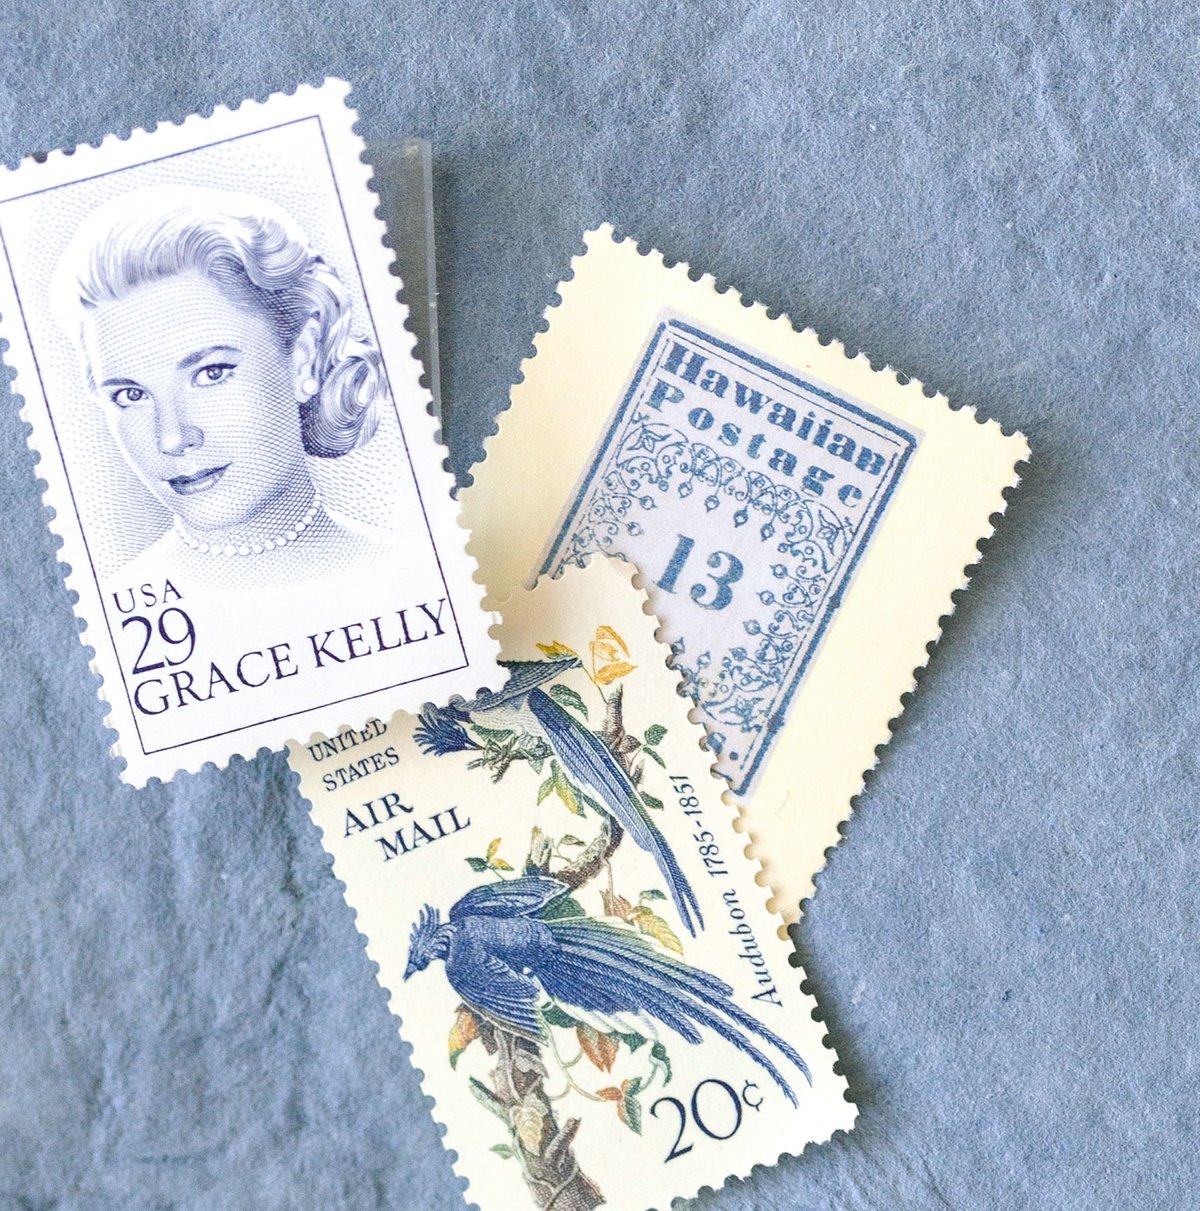 Do Antique Stamps Still Worth Anything In 2023?